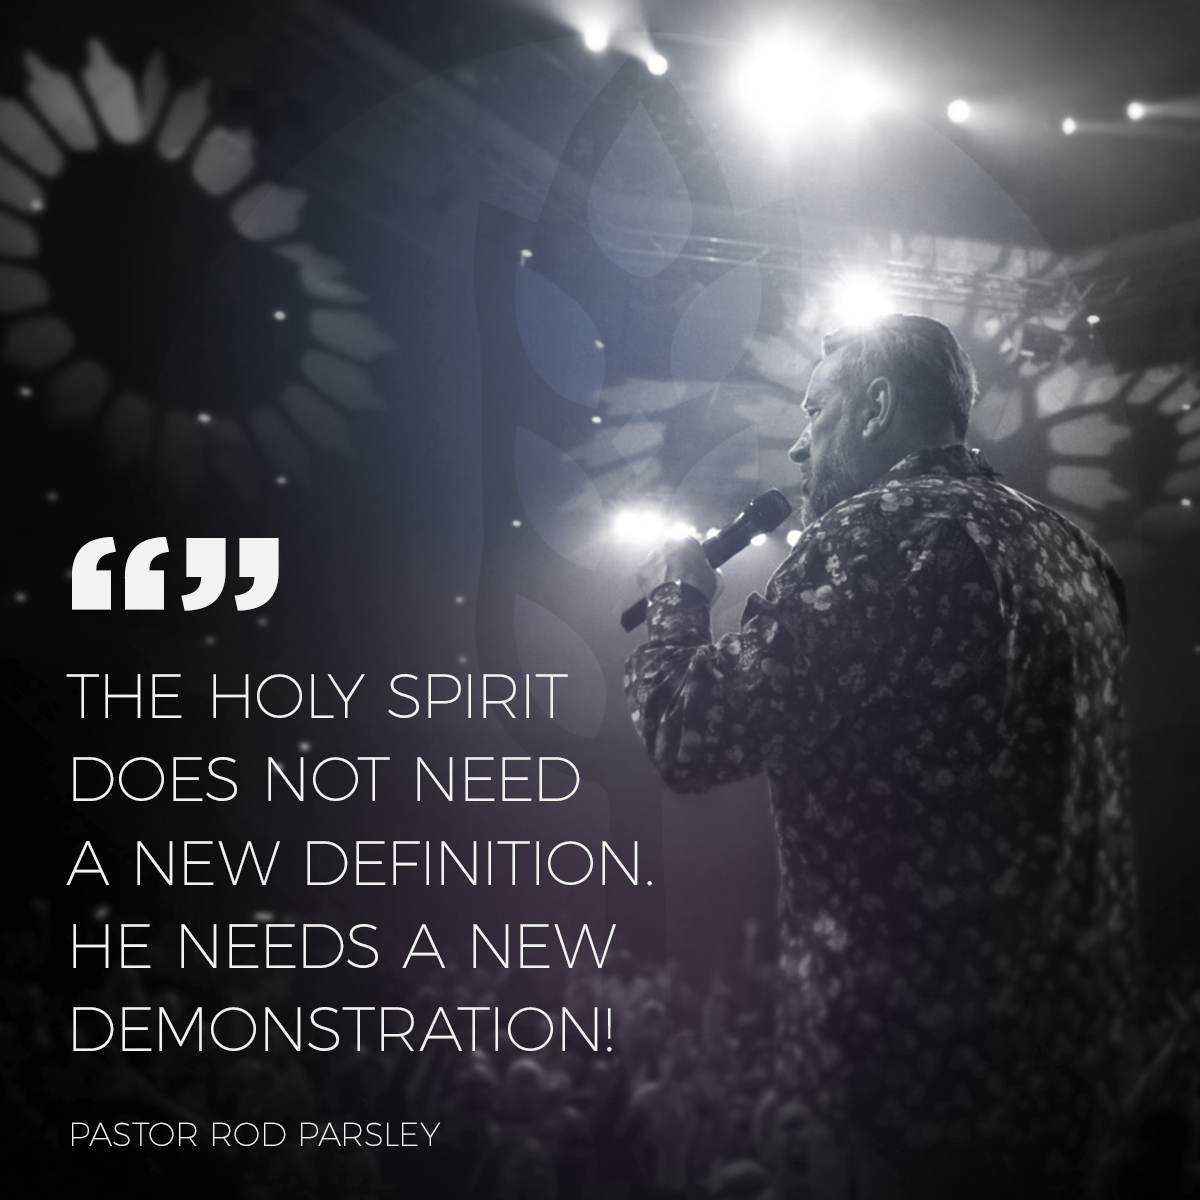 “The Holy Spirit does not need a new definition. He needs a new demonstration!” – Pastor Rod Parsley